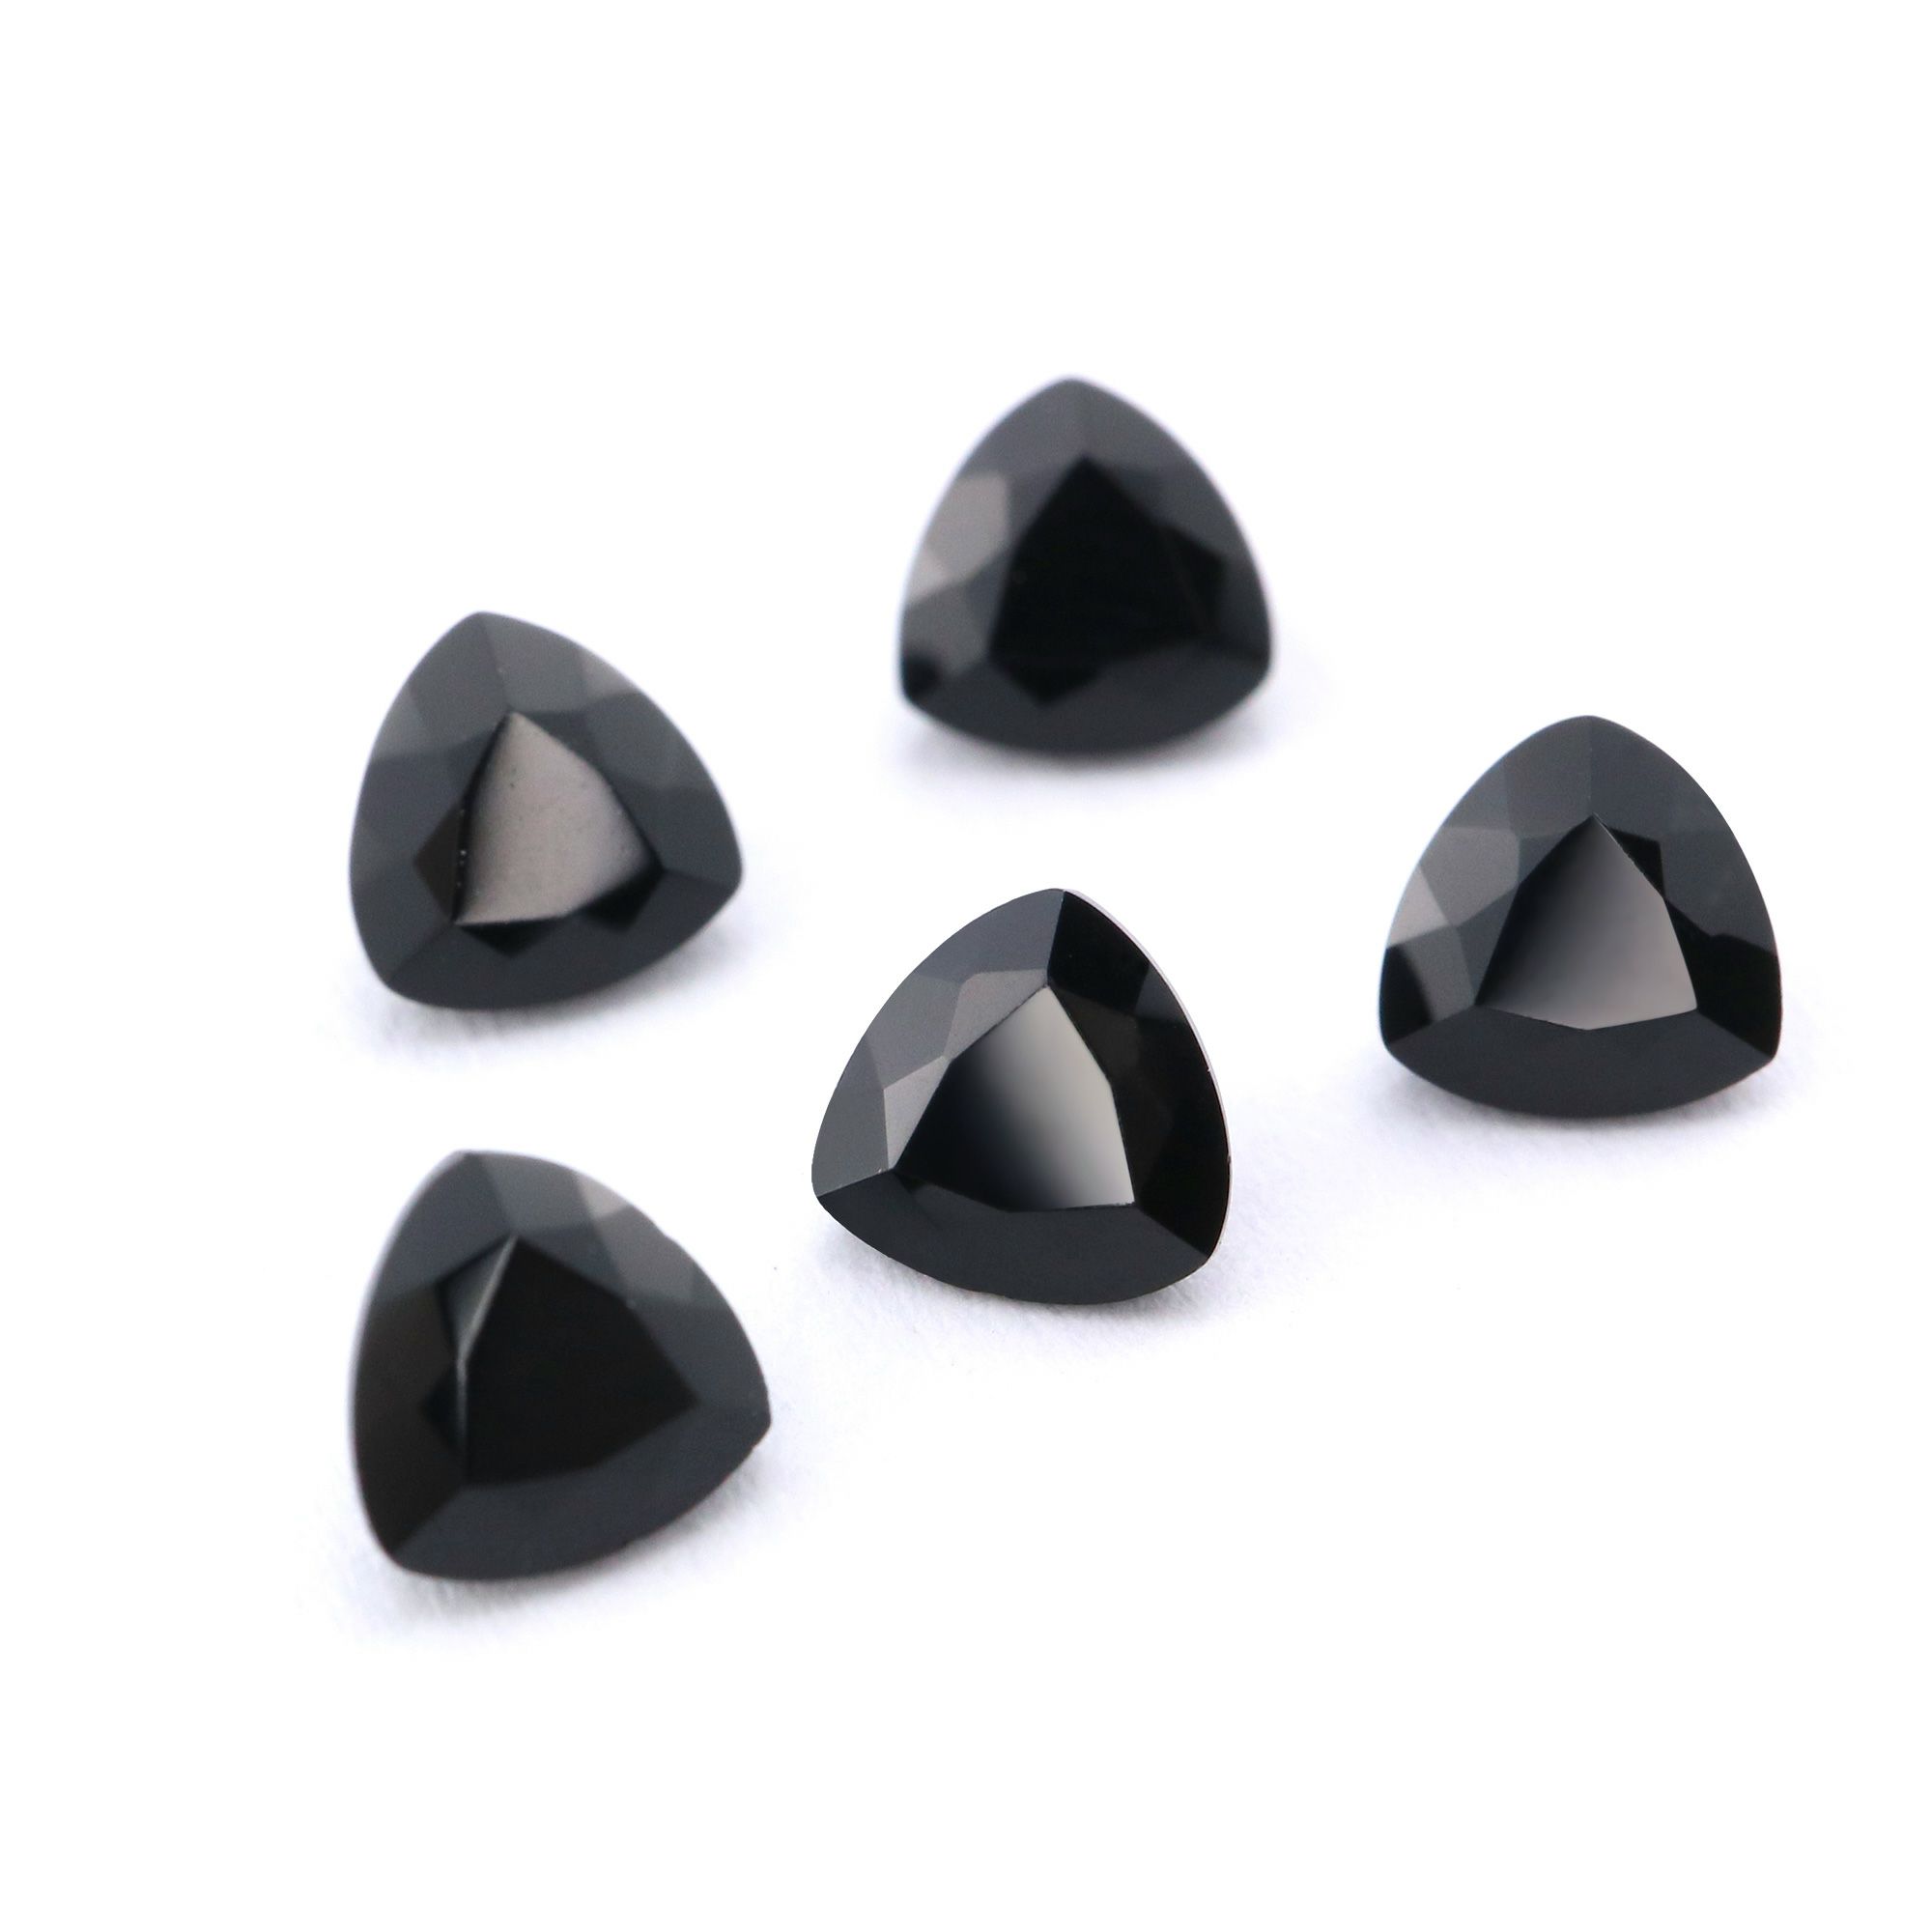 1Pcs 4MM Natural Trillion Black Onyx Faceted Cut Triangle Loose Gemstone Nature Semi Precious Stone DIY Jewelry Supplies 4160028 - Click Image to Close